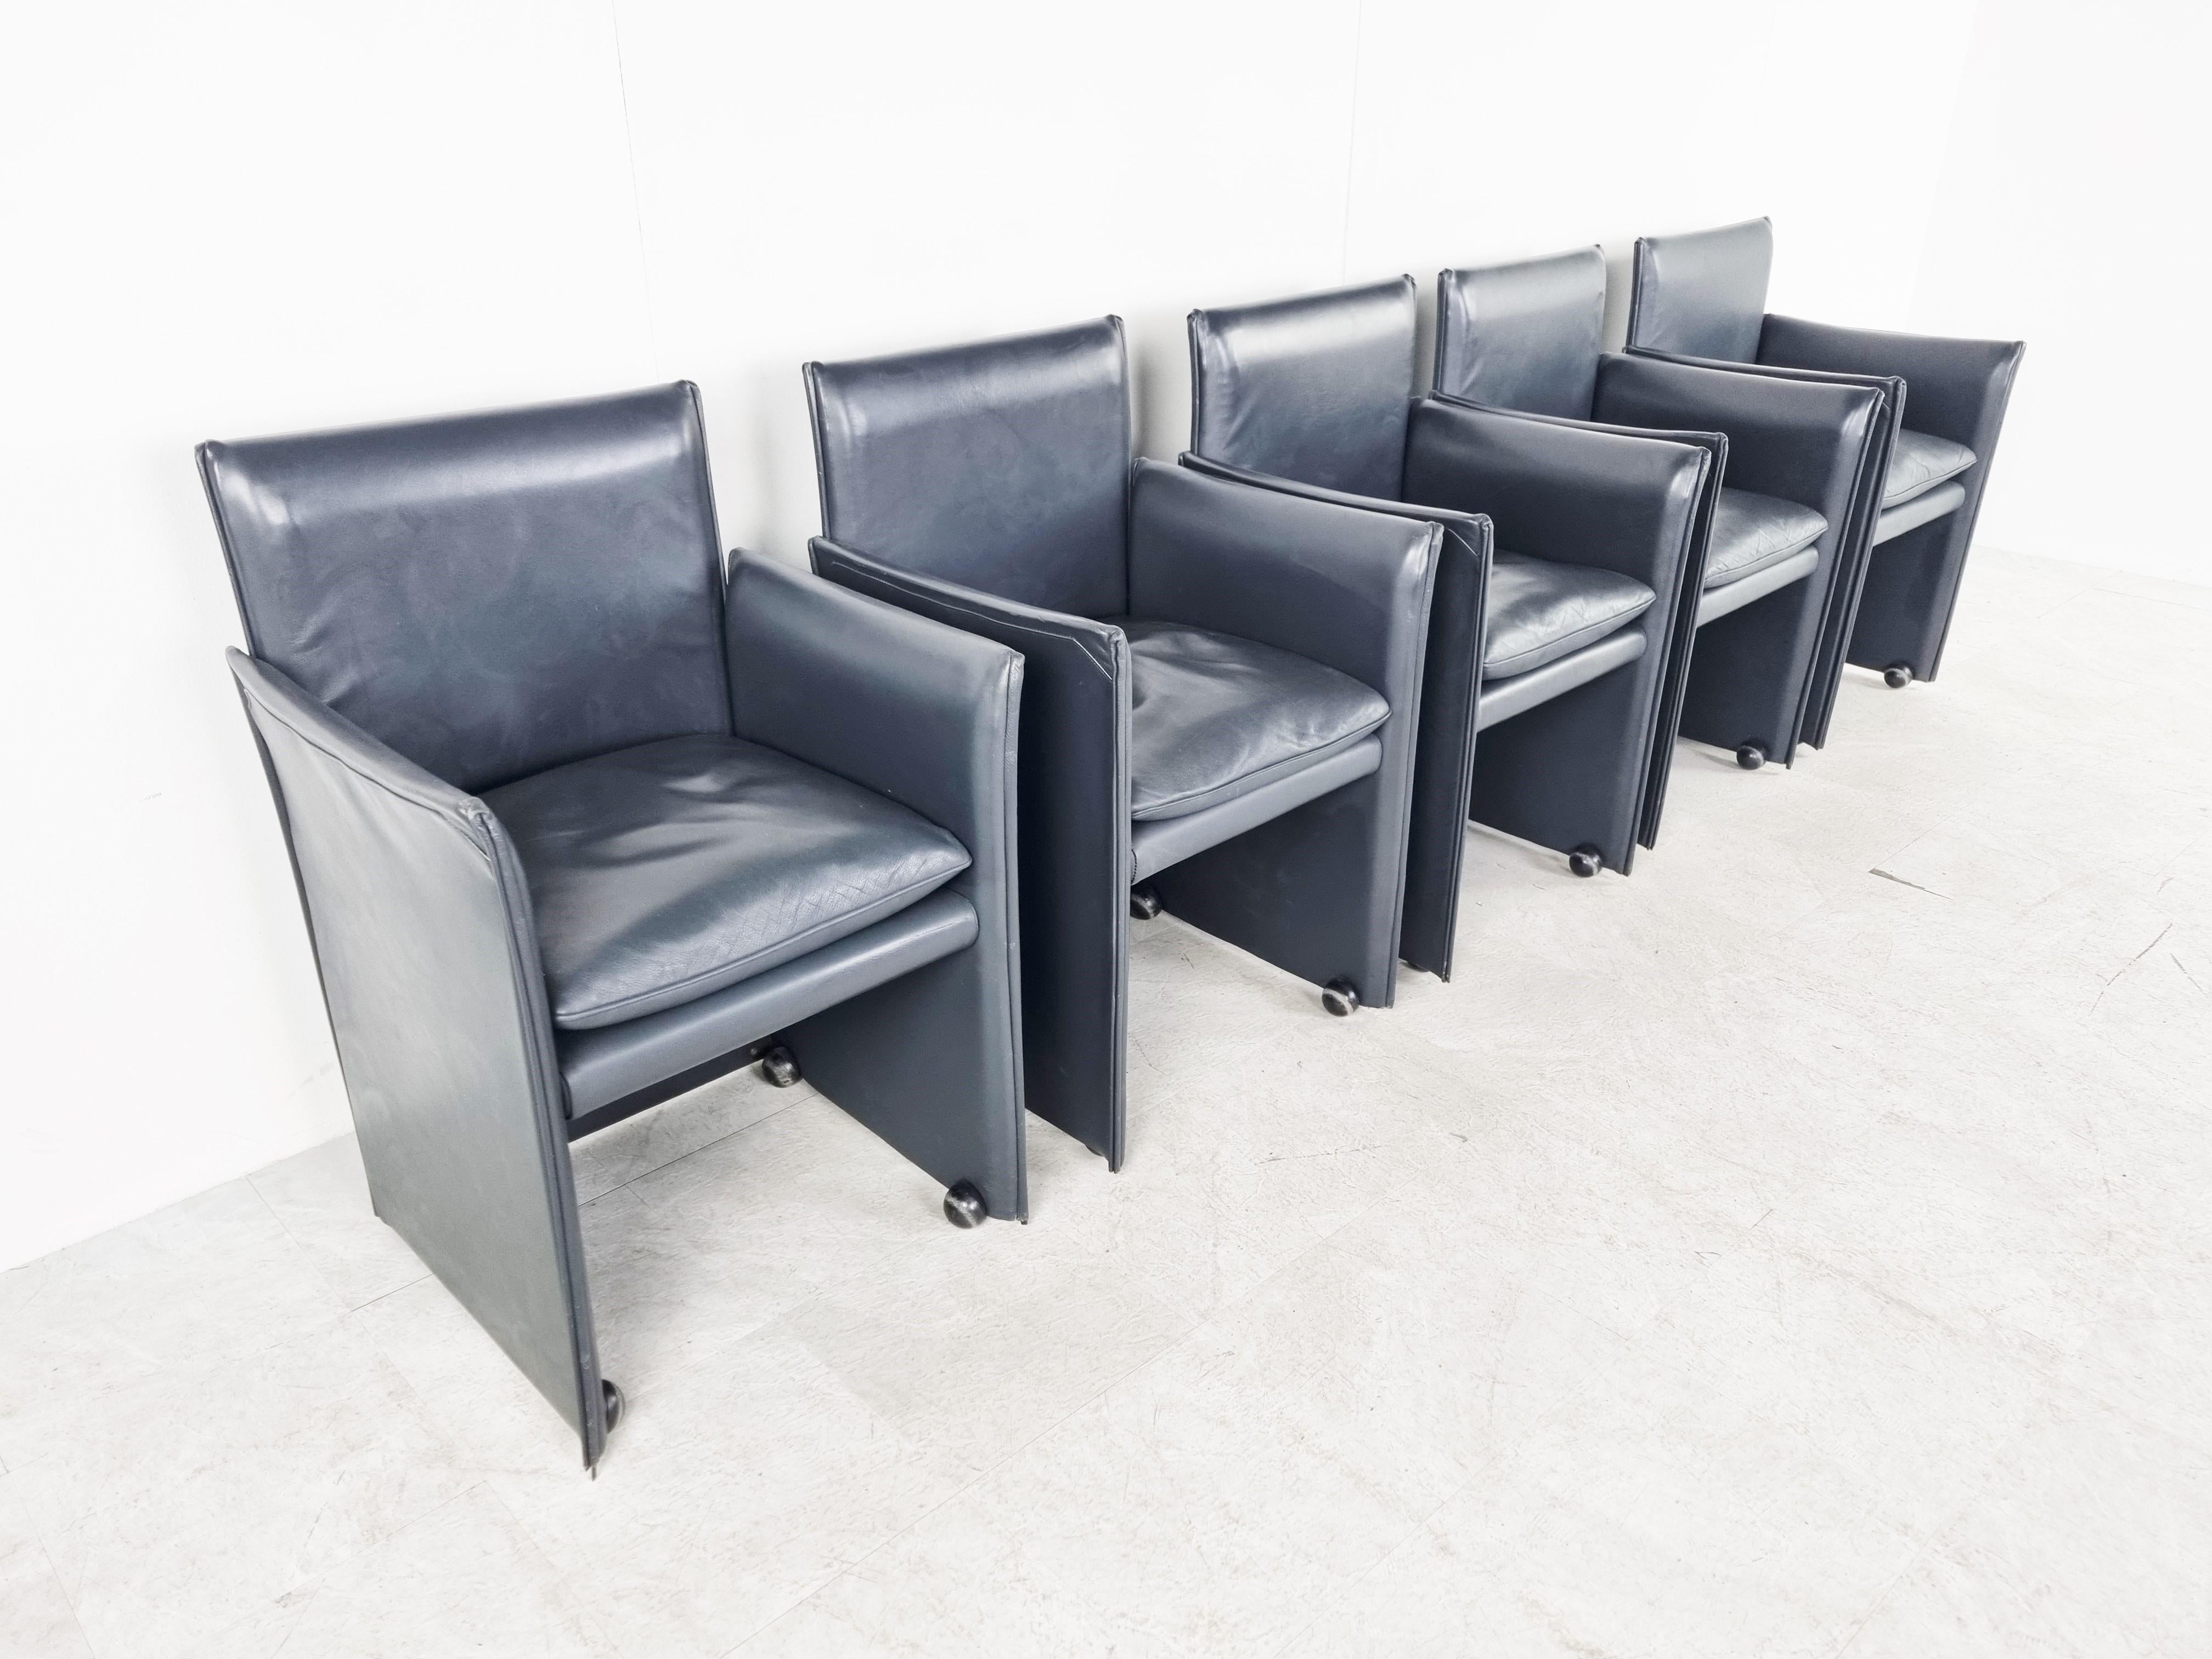 Grey leather 401 break chairs designed by Mario Bellini and produced by Cassina.

The chairs are in perfect condition and are of a very high quality, as expected from Cassina furniture.

The chairs have 4 casters which make them glide smoothly